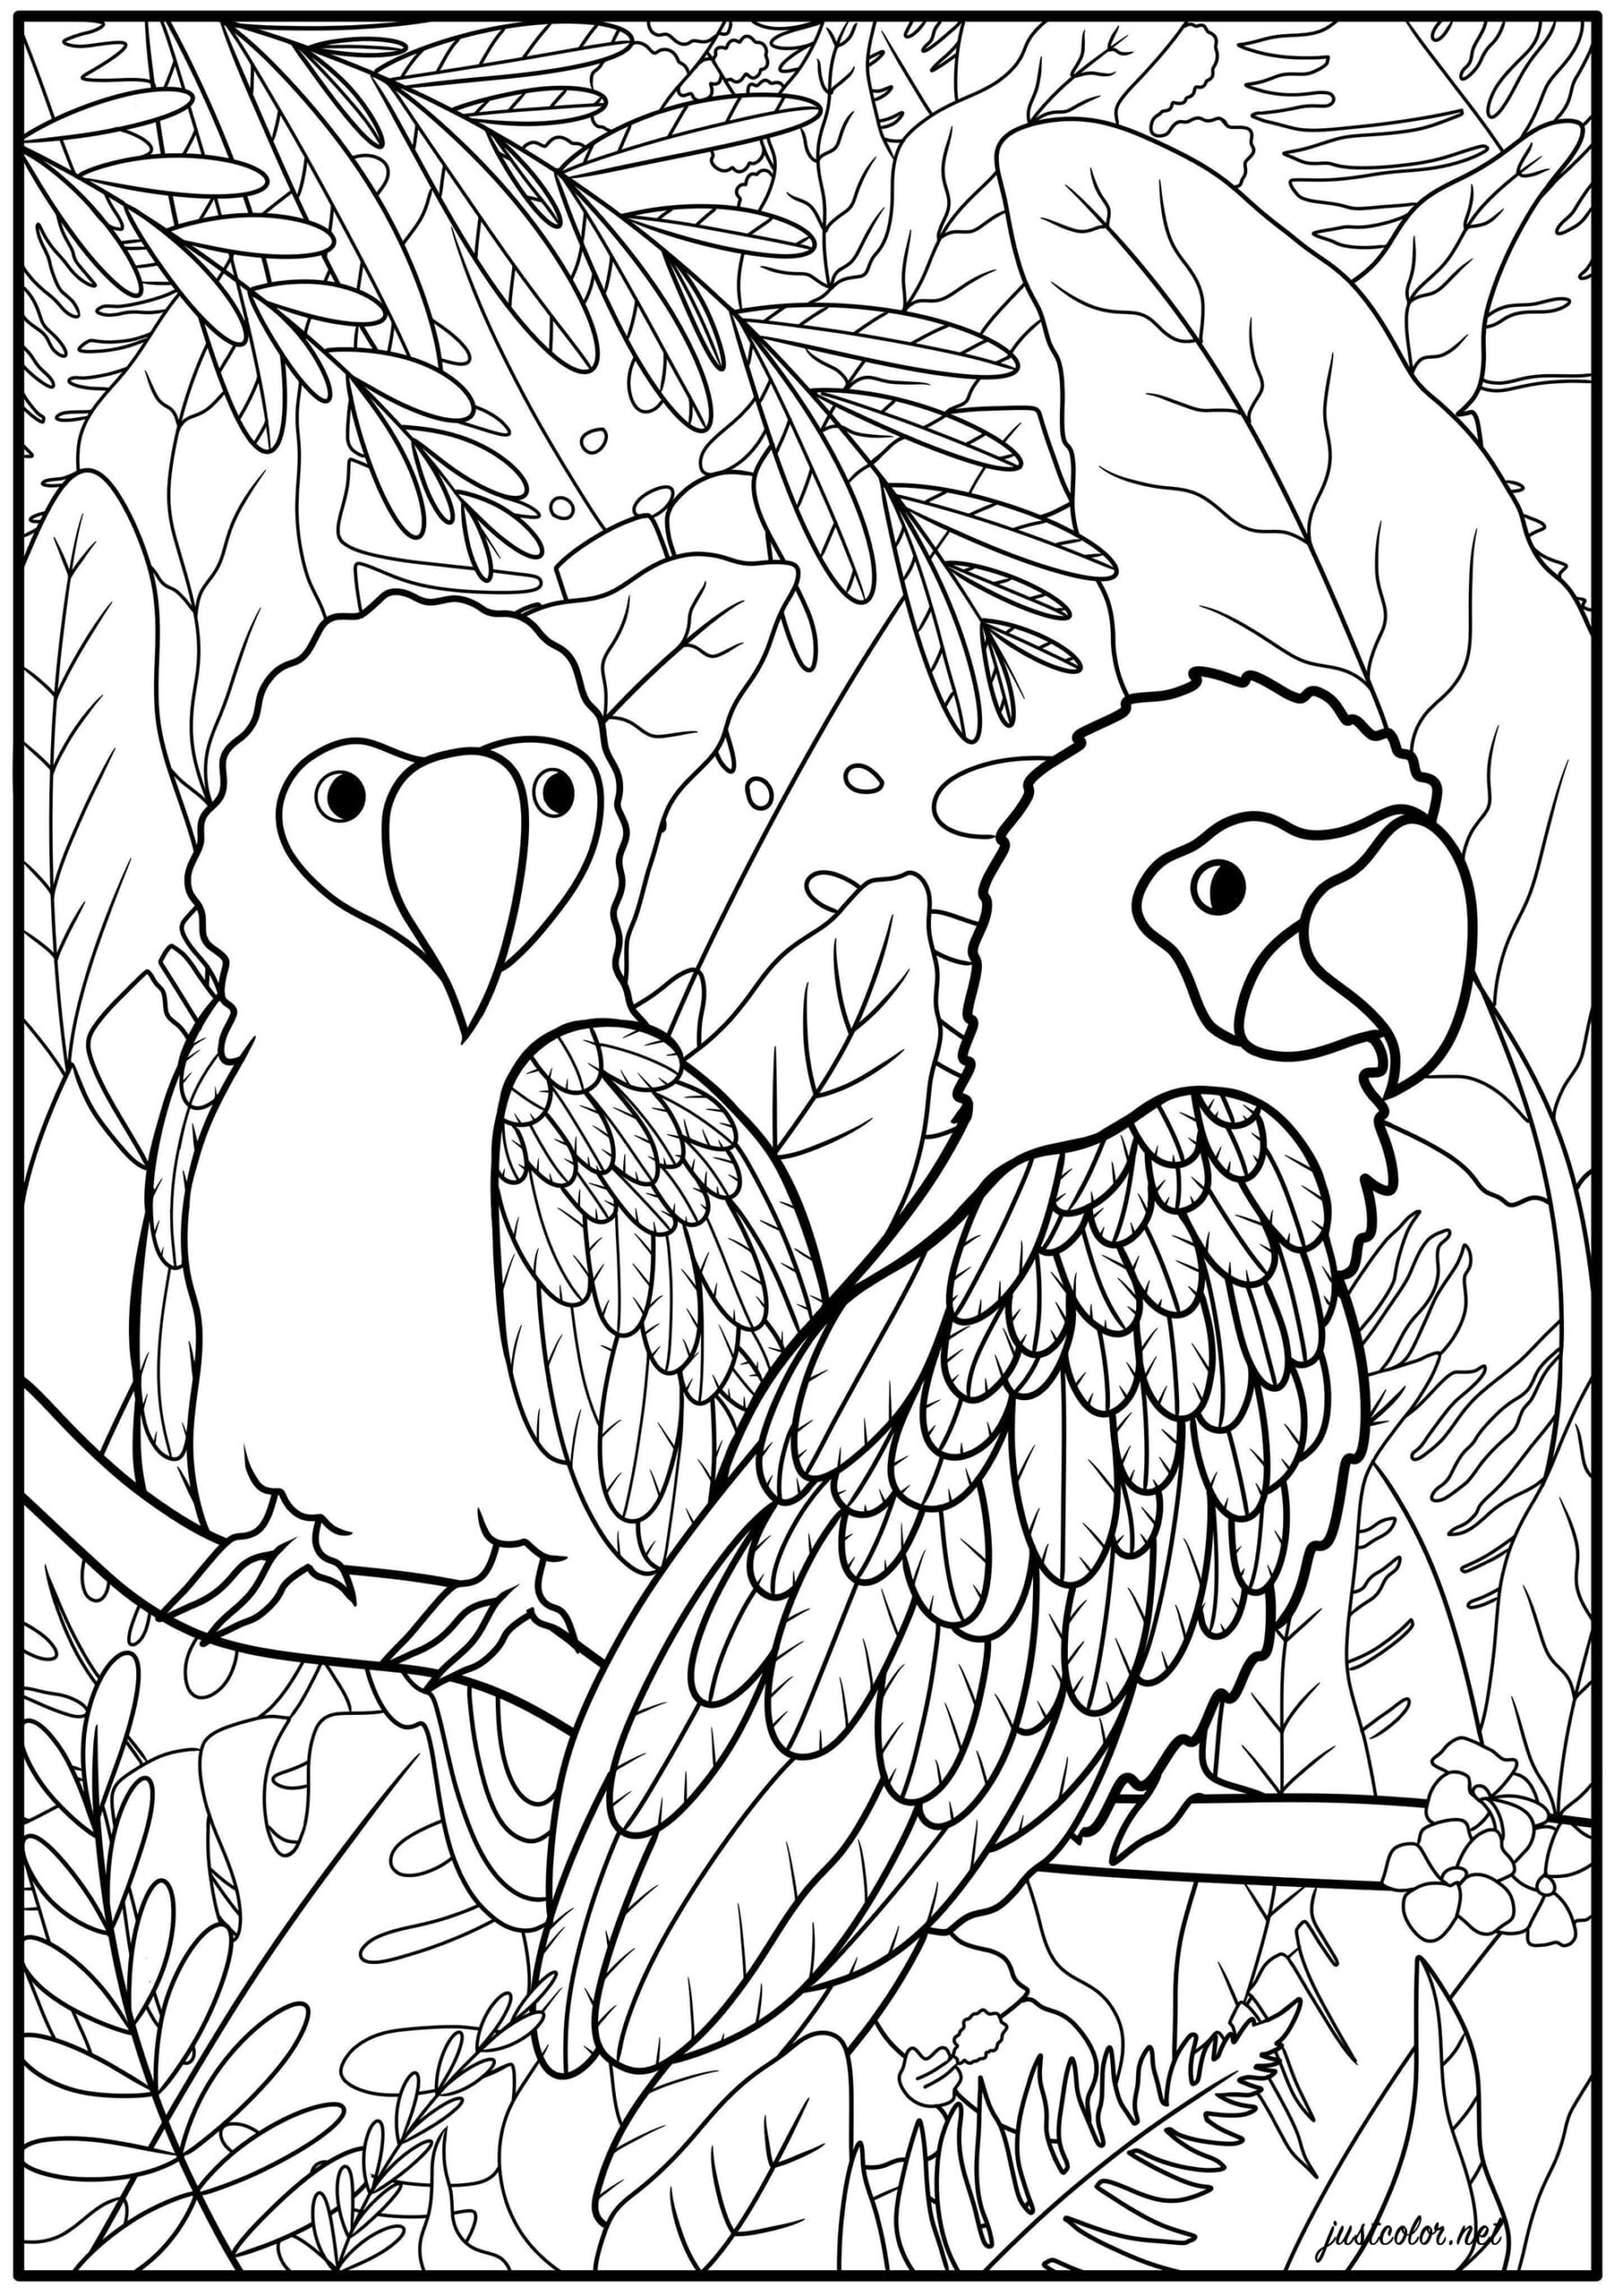 Birds Coloring Pages For Adults